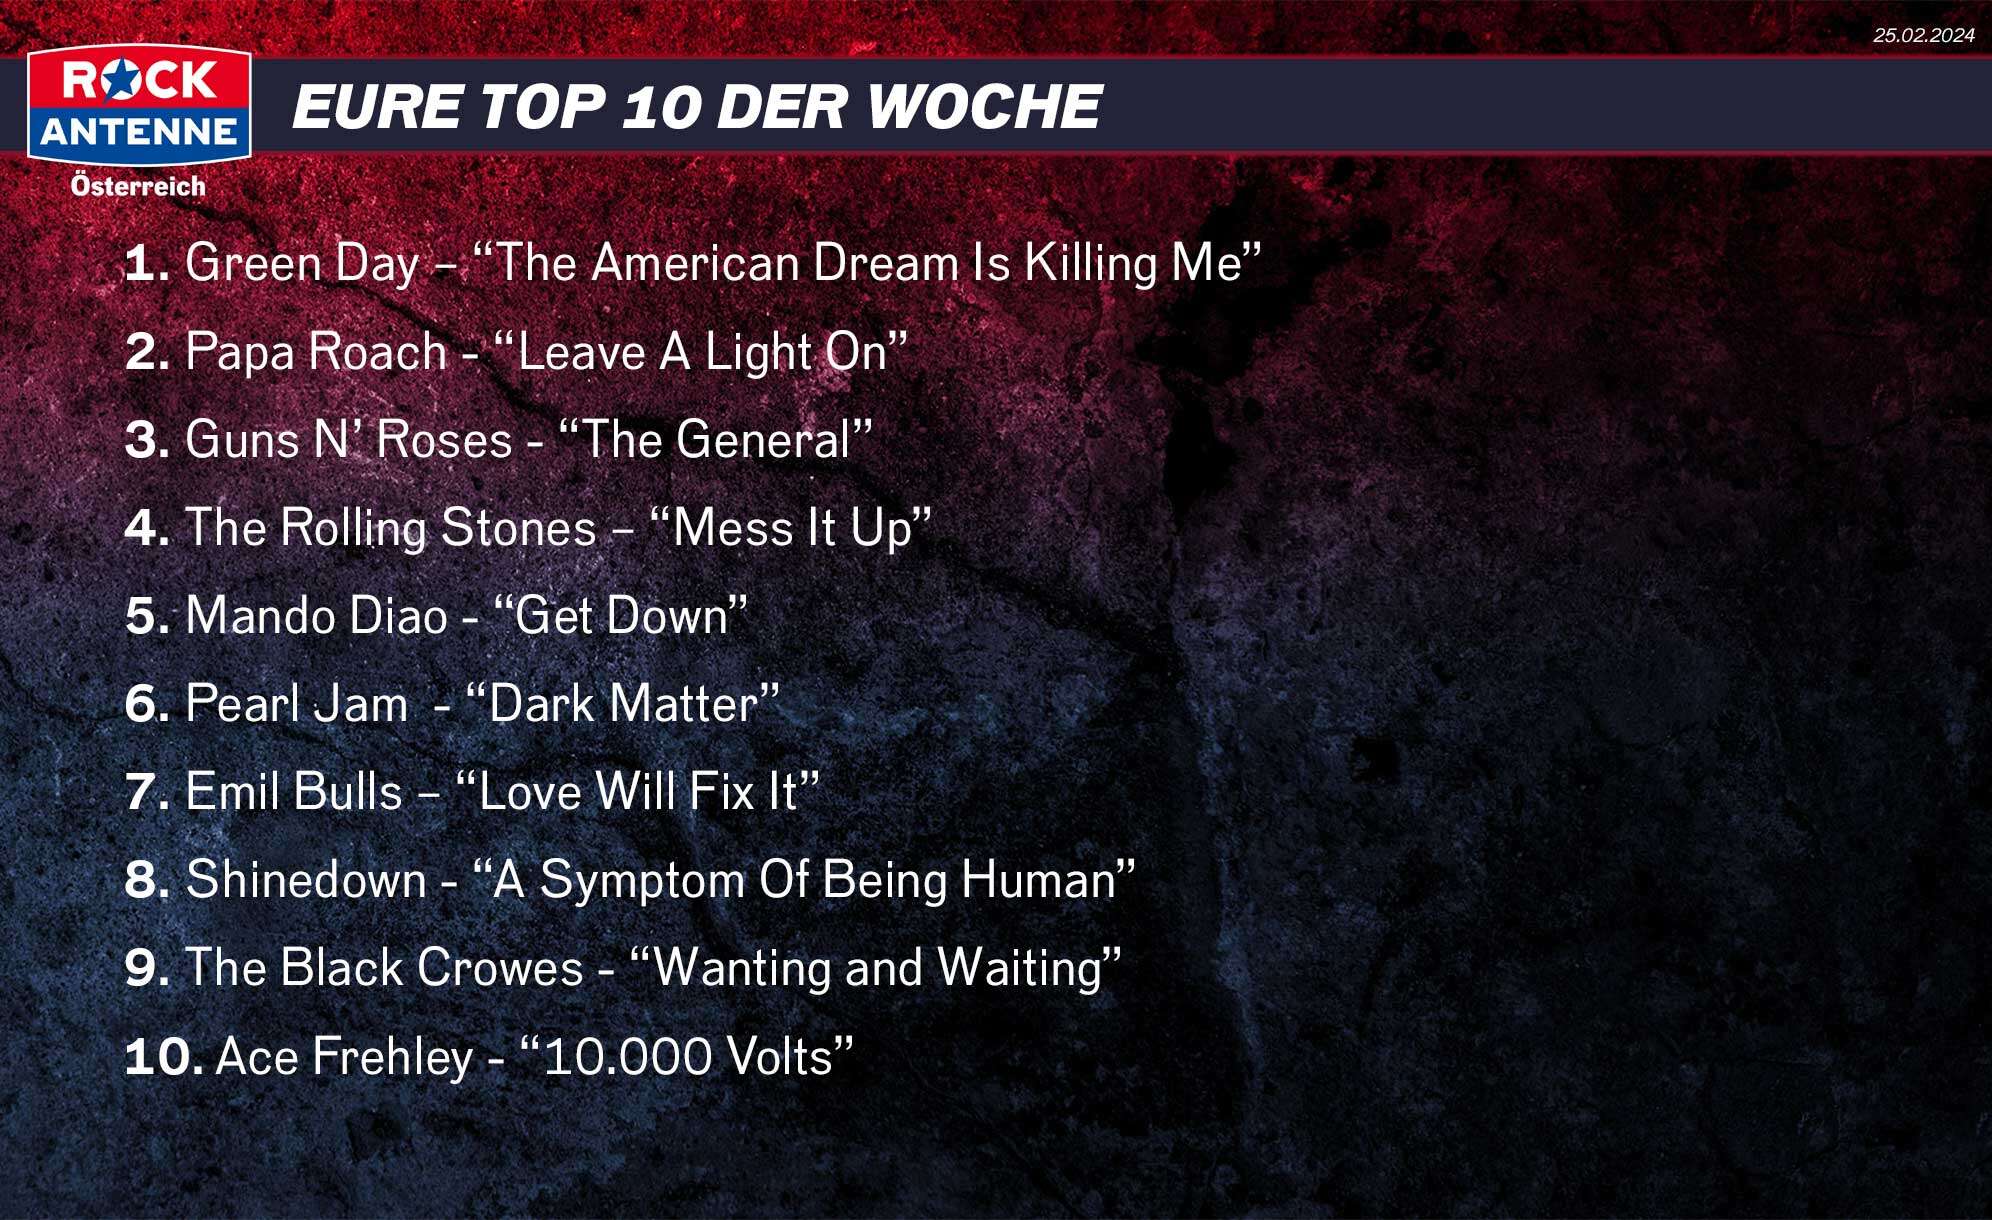 Die Top 10 vom 25.02.2024: 1. Green Day – “The American Dream Is Killing Me” 2. Papa Roach - “Leave A Light On” 3. Guns N’ Roses - “The General” 4. The Rolling Stones – “Mess It Up” 5. Mando Diao - “Get Down” 6. Pearl Jam  - “Dark Matter” 7. Emil Bulls – “Love Will Fix It” 8. Shinedown - “A Symptom Of Being Human” 9. The Black Crowes - “Wanting and Waiting” 10. Ace Frehley - “10.000 Volts”